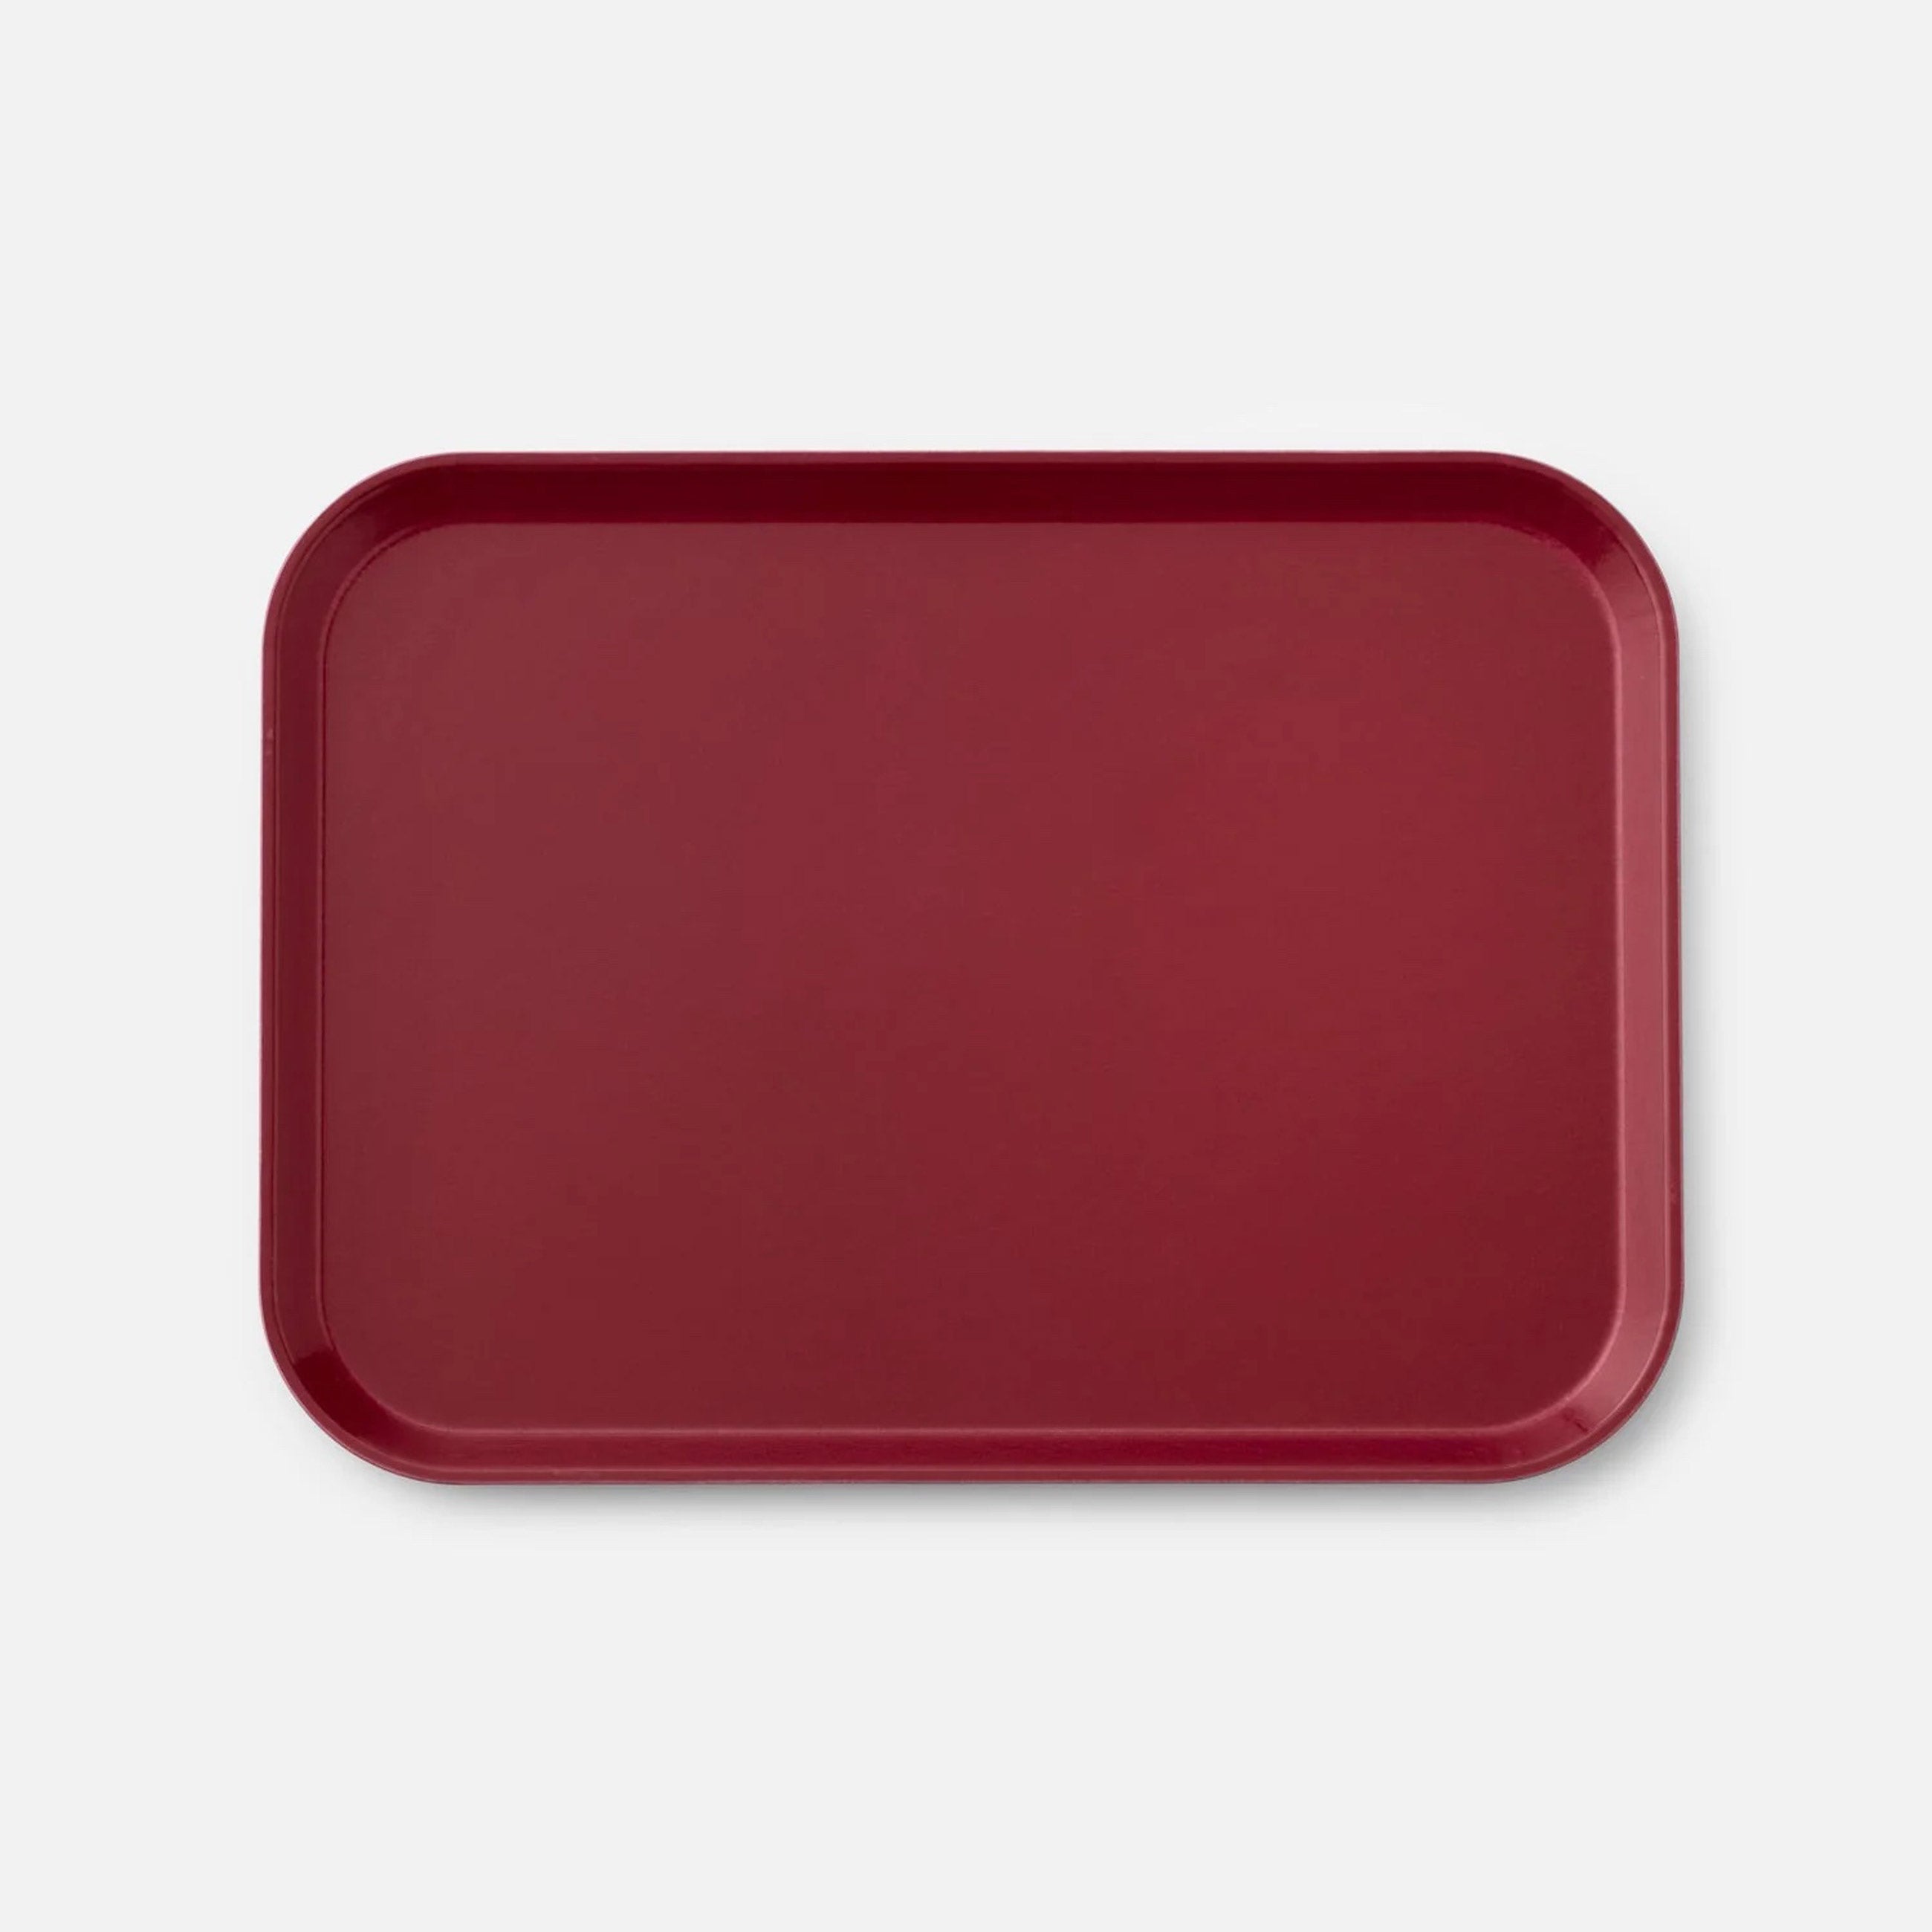 Berry colored tray.